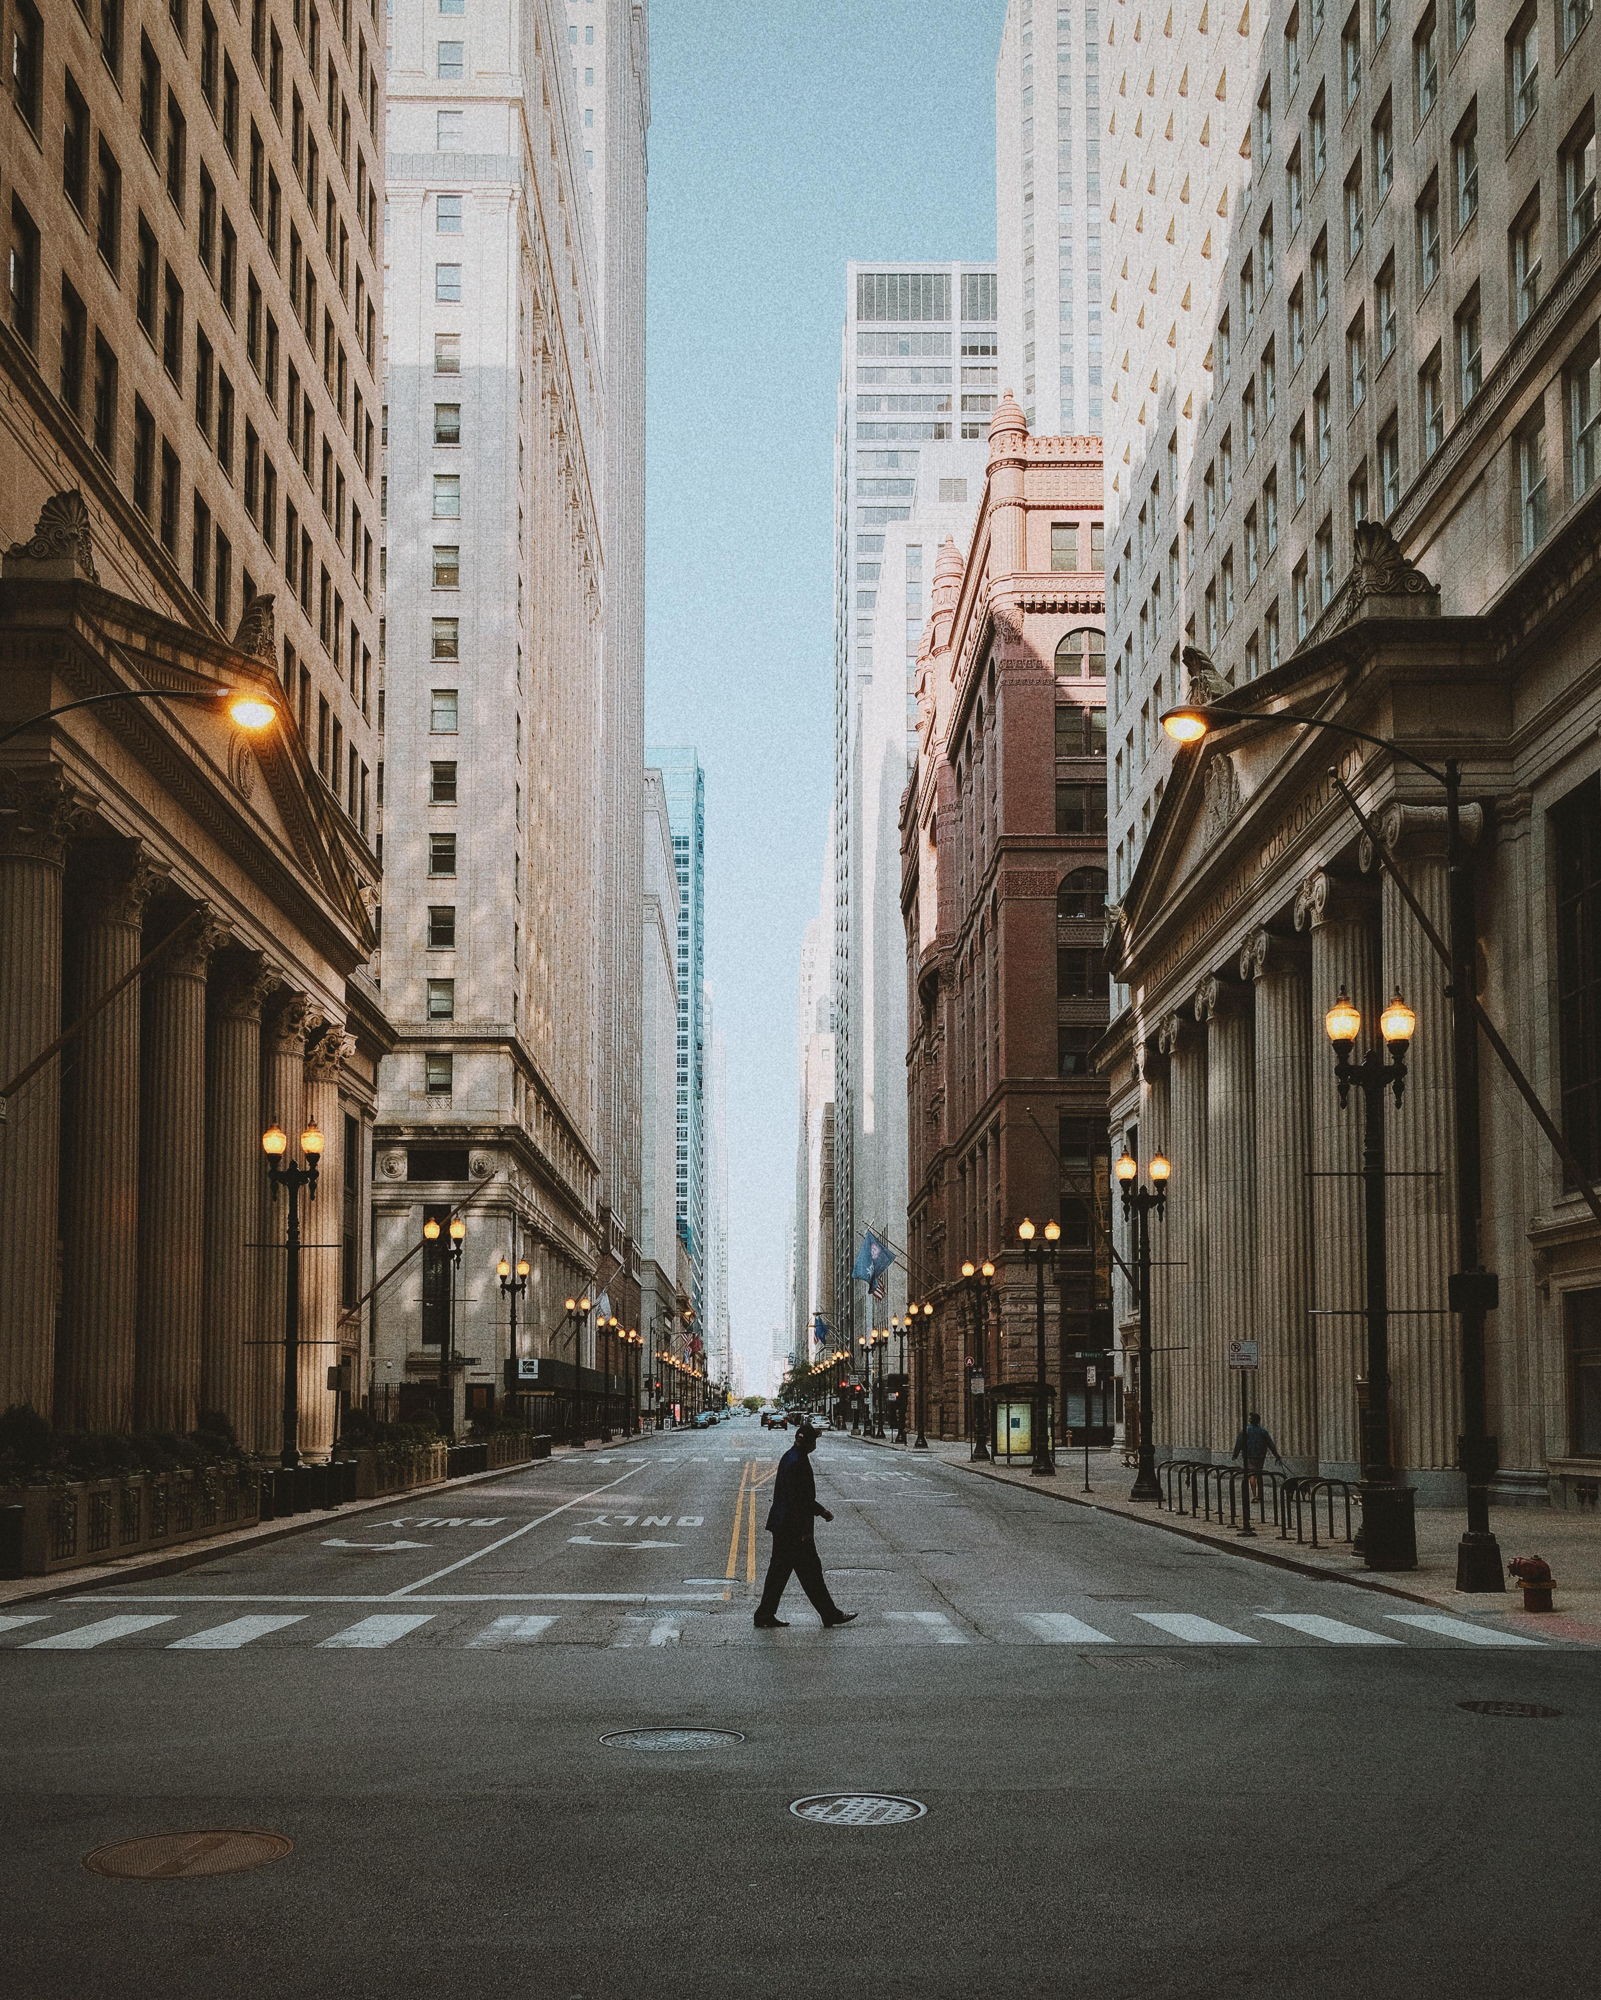 A man walks in a city between tall rows of buildings with large columns.